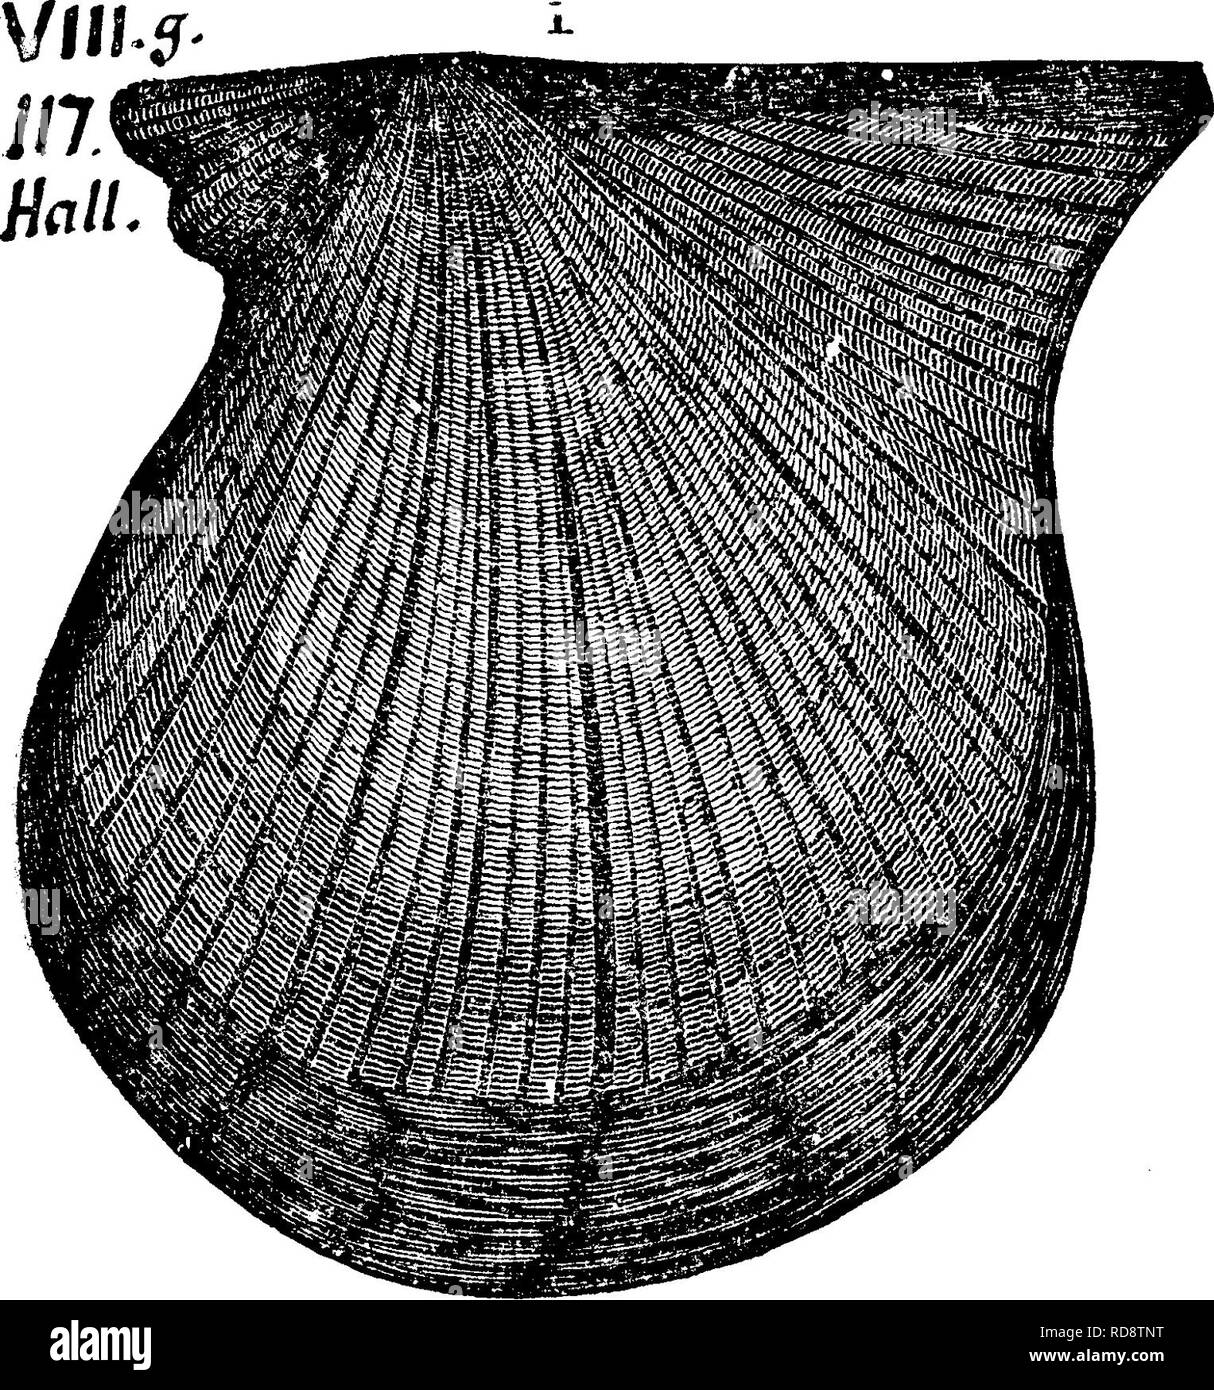 . A dictionary of the fossils of Pennsylvania and neighboring states named in the reports and catalogues of the survey ... Paleontology. 5 AVICULOPECTEN OCCrOENTAUS. Aviculopecten occidentalis. (Shumard, in Swallow's Missouri Rt. of J(lll...ssg^^^s^ 3, ^ 1855, page 207, plate 0, fig. 18.) Collett's Indiana Rt. of 1883,pagel43, plate 28, fig. 3, outside view of left valve, natural size. XIII-XY. One of the commonest shells of the Upper and Lower Coal Measures, from Indiana westward ; has been found in Utah and Arizona ; ranges up into the Permian (Meek.) Note.—It is not the Che- mung shell to w Stock Photo